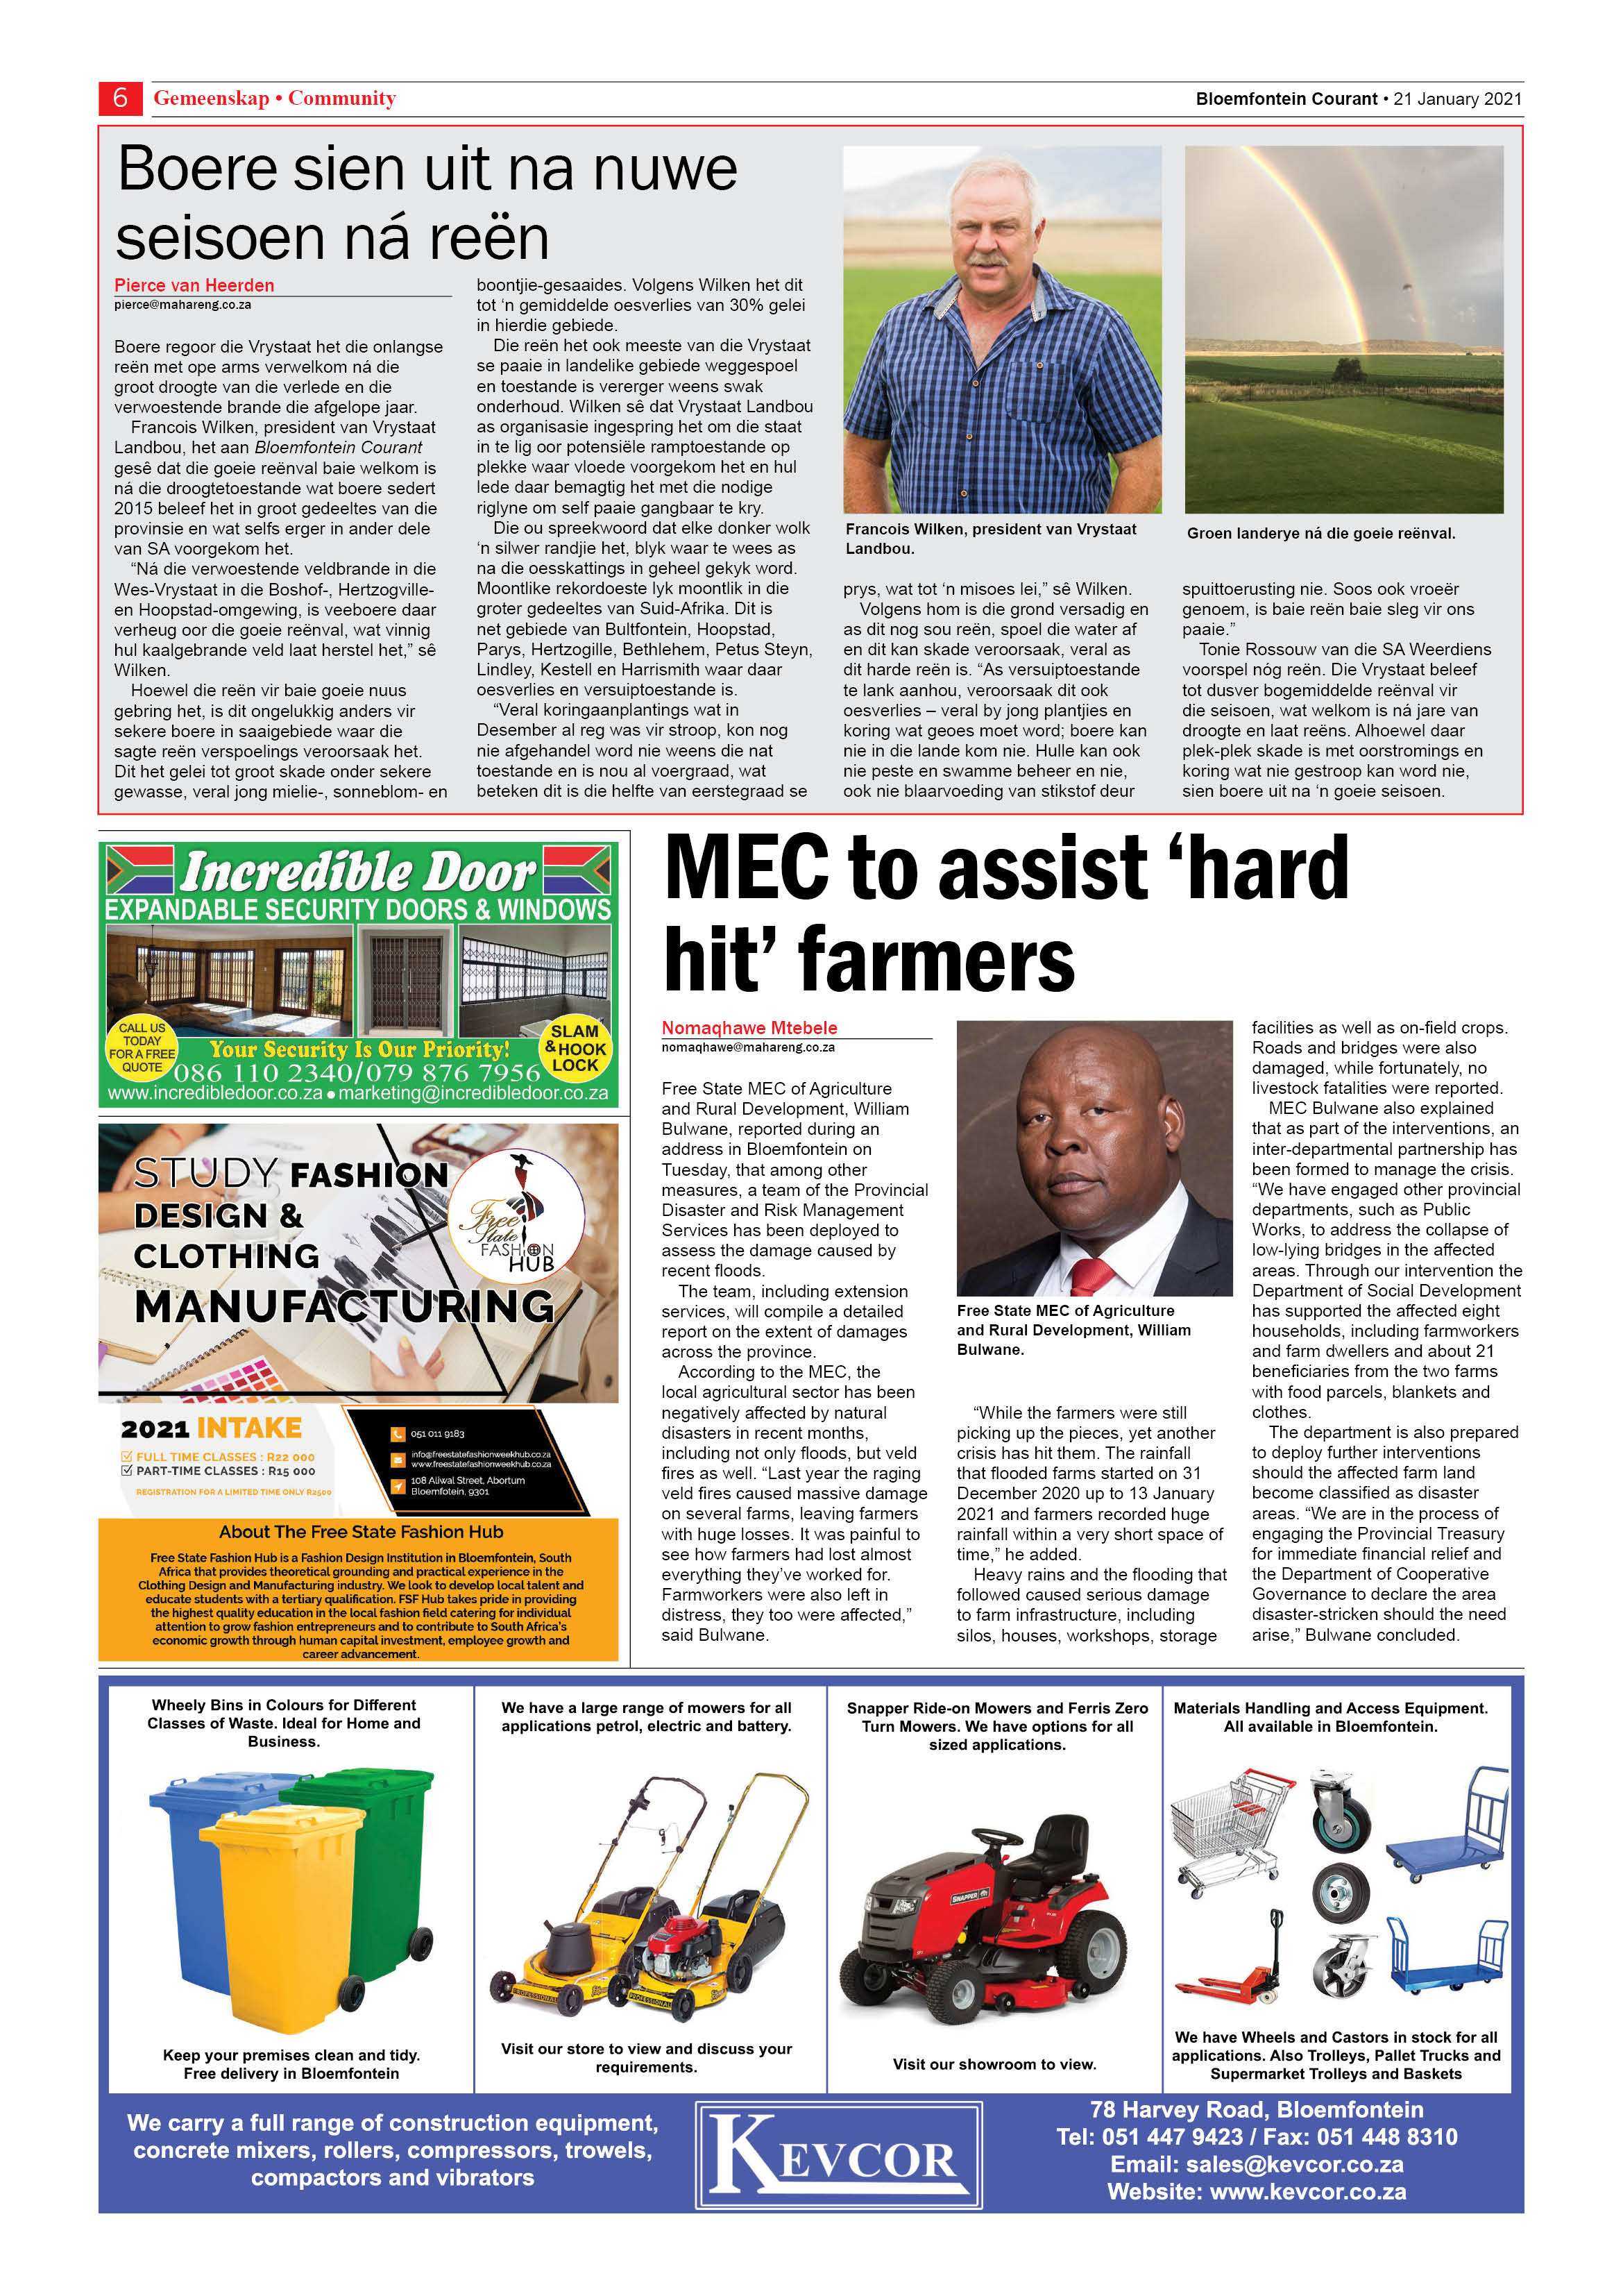 https-bloemfonteincourant-epaper-products-caxton-co-za-wp-content-ftp-epaper_uploads-86-bloemfontein_courant_21_january_2021-bloemfontein_courant_21_january_2021-5-pdfpg12-epapers-page-6